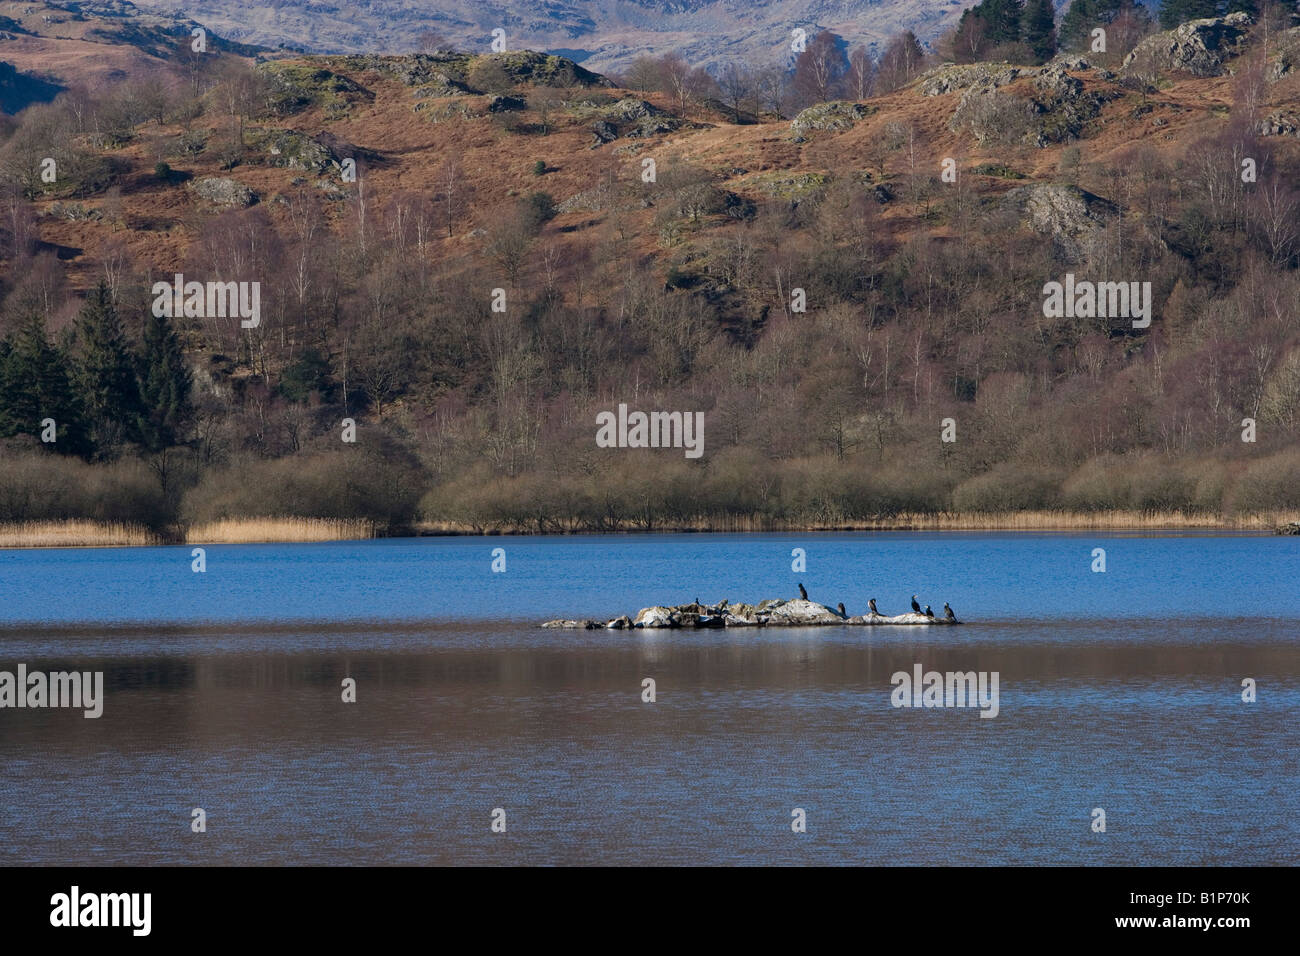 Cormorants on a small island in the middle of Rydal Water, Lake District. Stock Photo